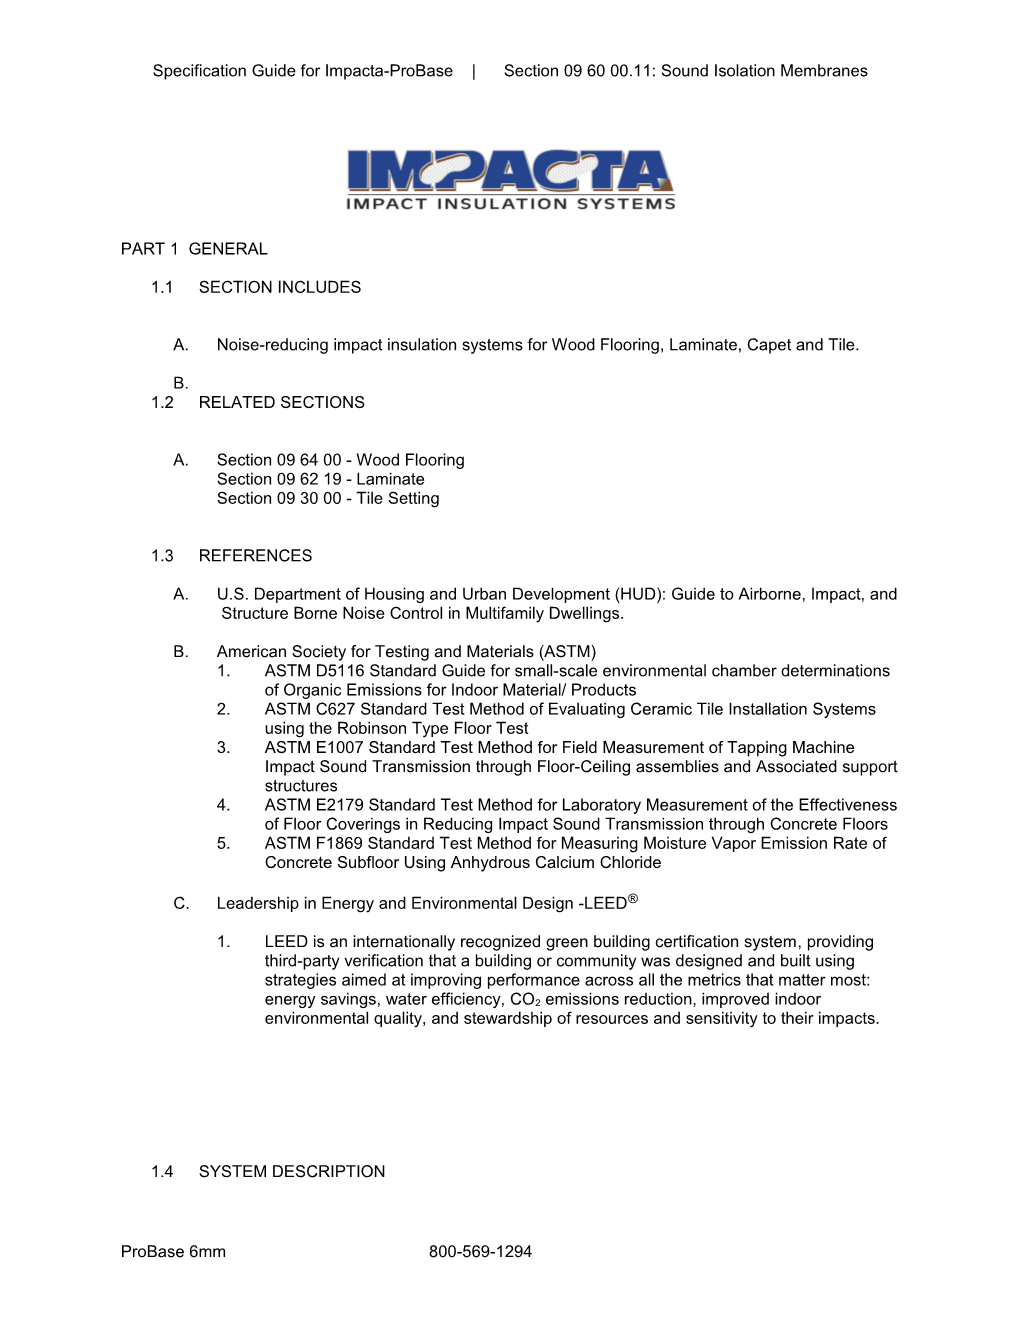 Specification Guide for Impacta-Regupol Probase Section 09 60 00.11: Sound Isolation Membranes s2